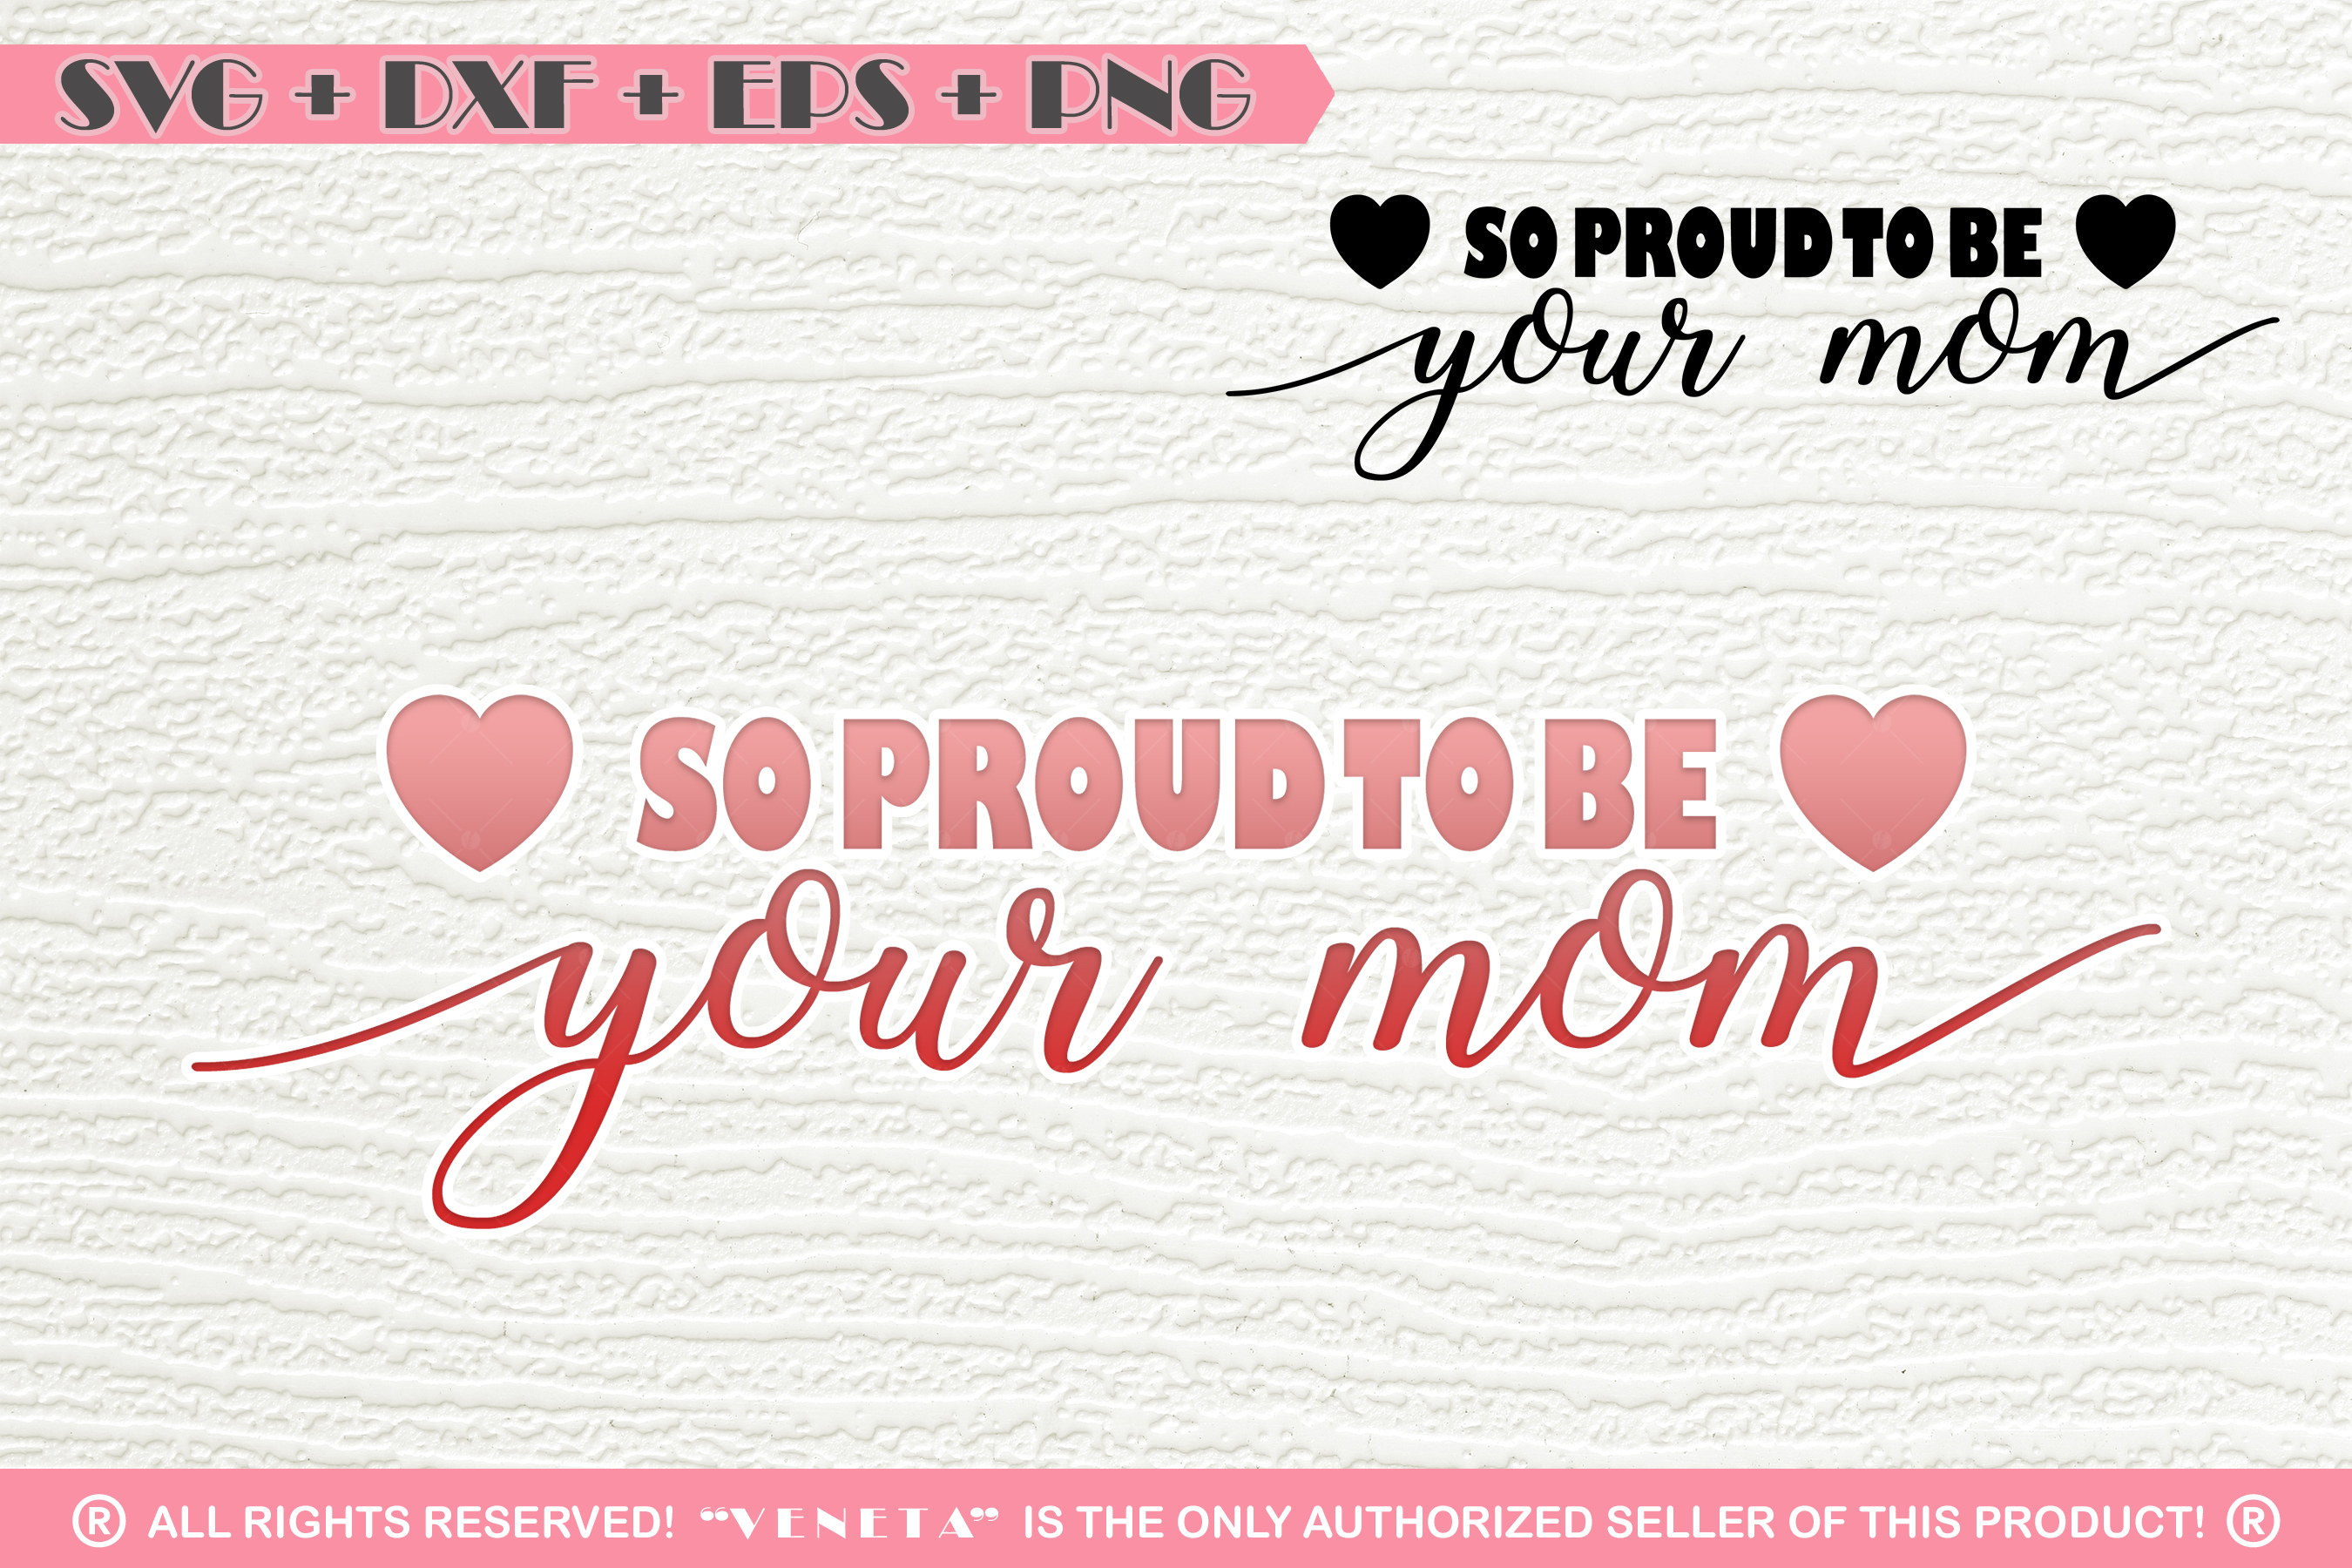 Download Proud to be your mom| Quotes| SVG DXF PNG EPS Cutting File